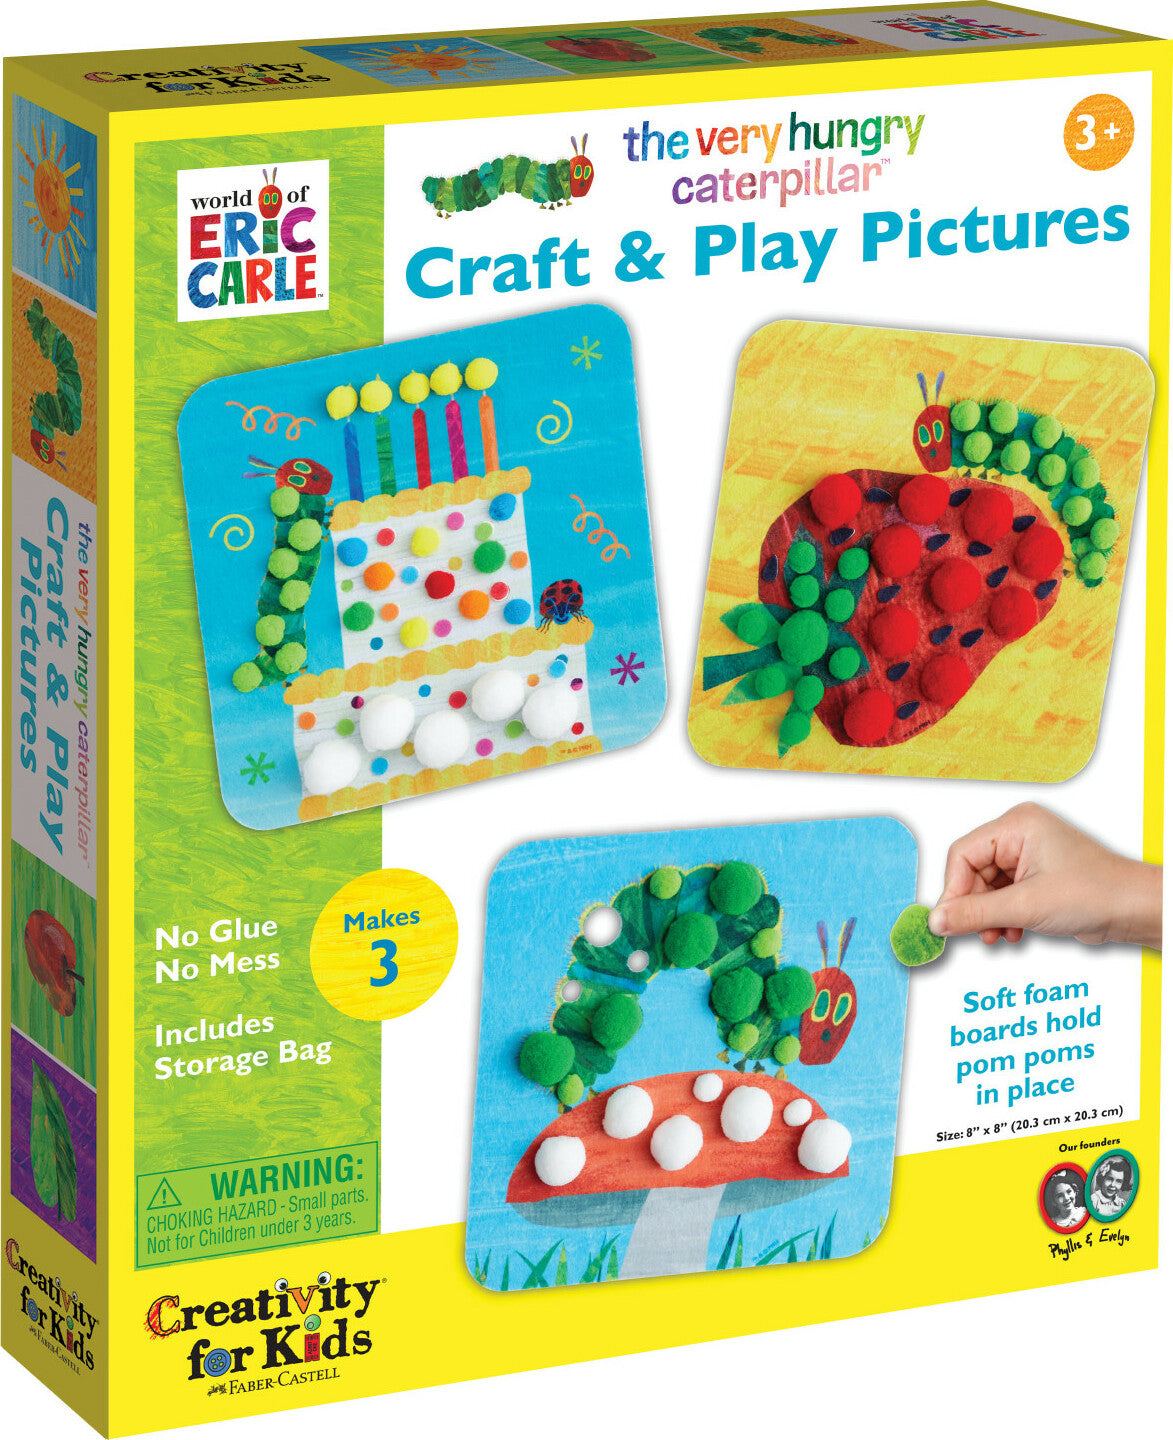 THE VERY HUNGRY CATERPILLAR CRAFT PLAY PICTURES